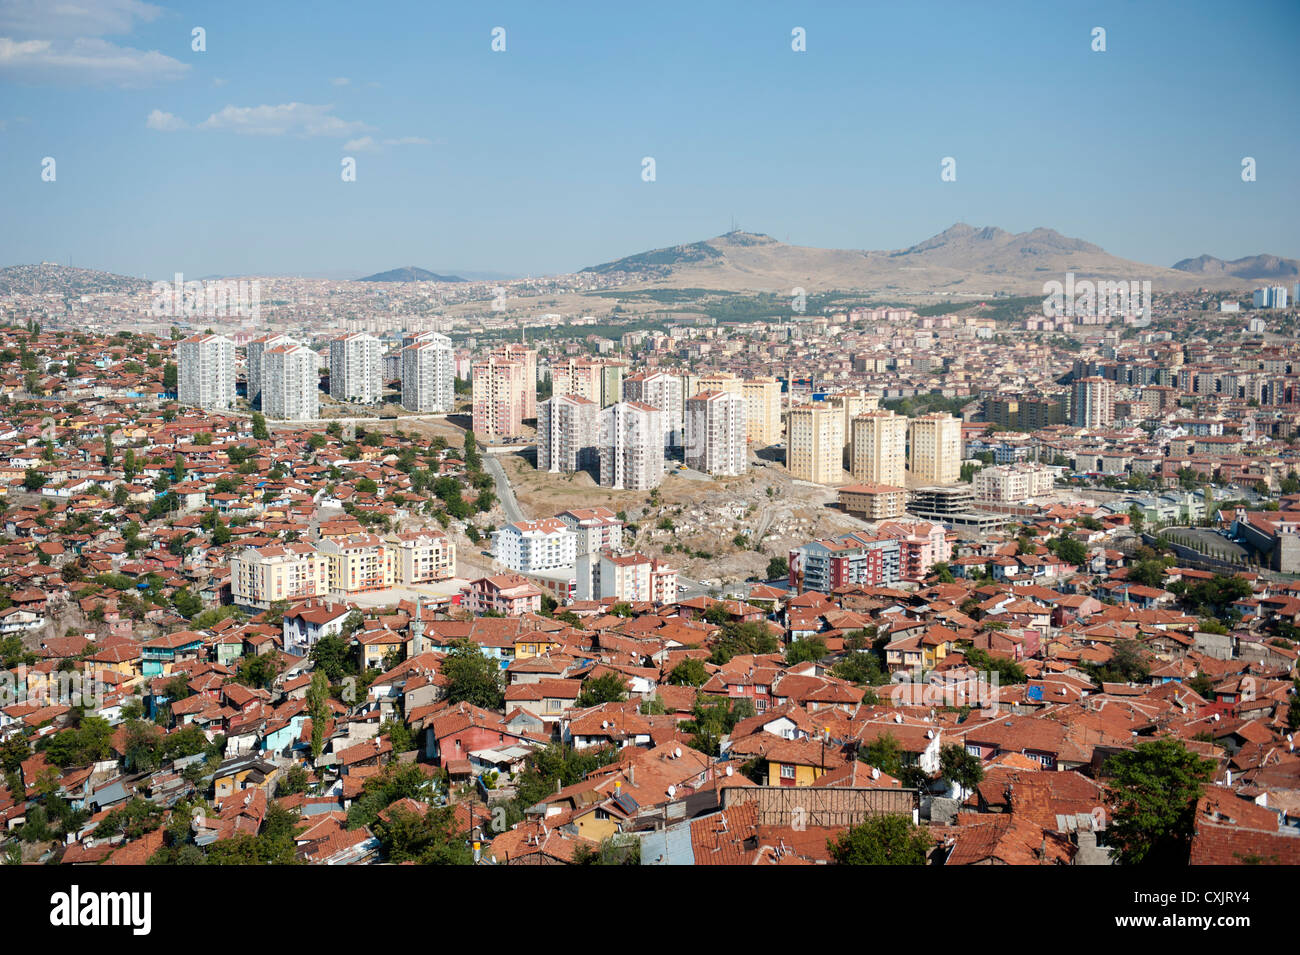 View of Ankara from the upper remparts of the citadel built on the highest point of the Turkish capital. Stock Photo